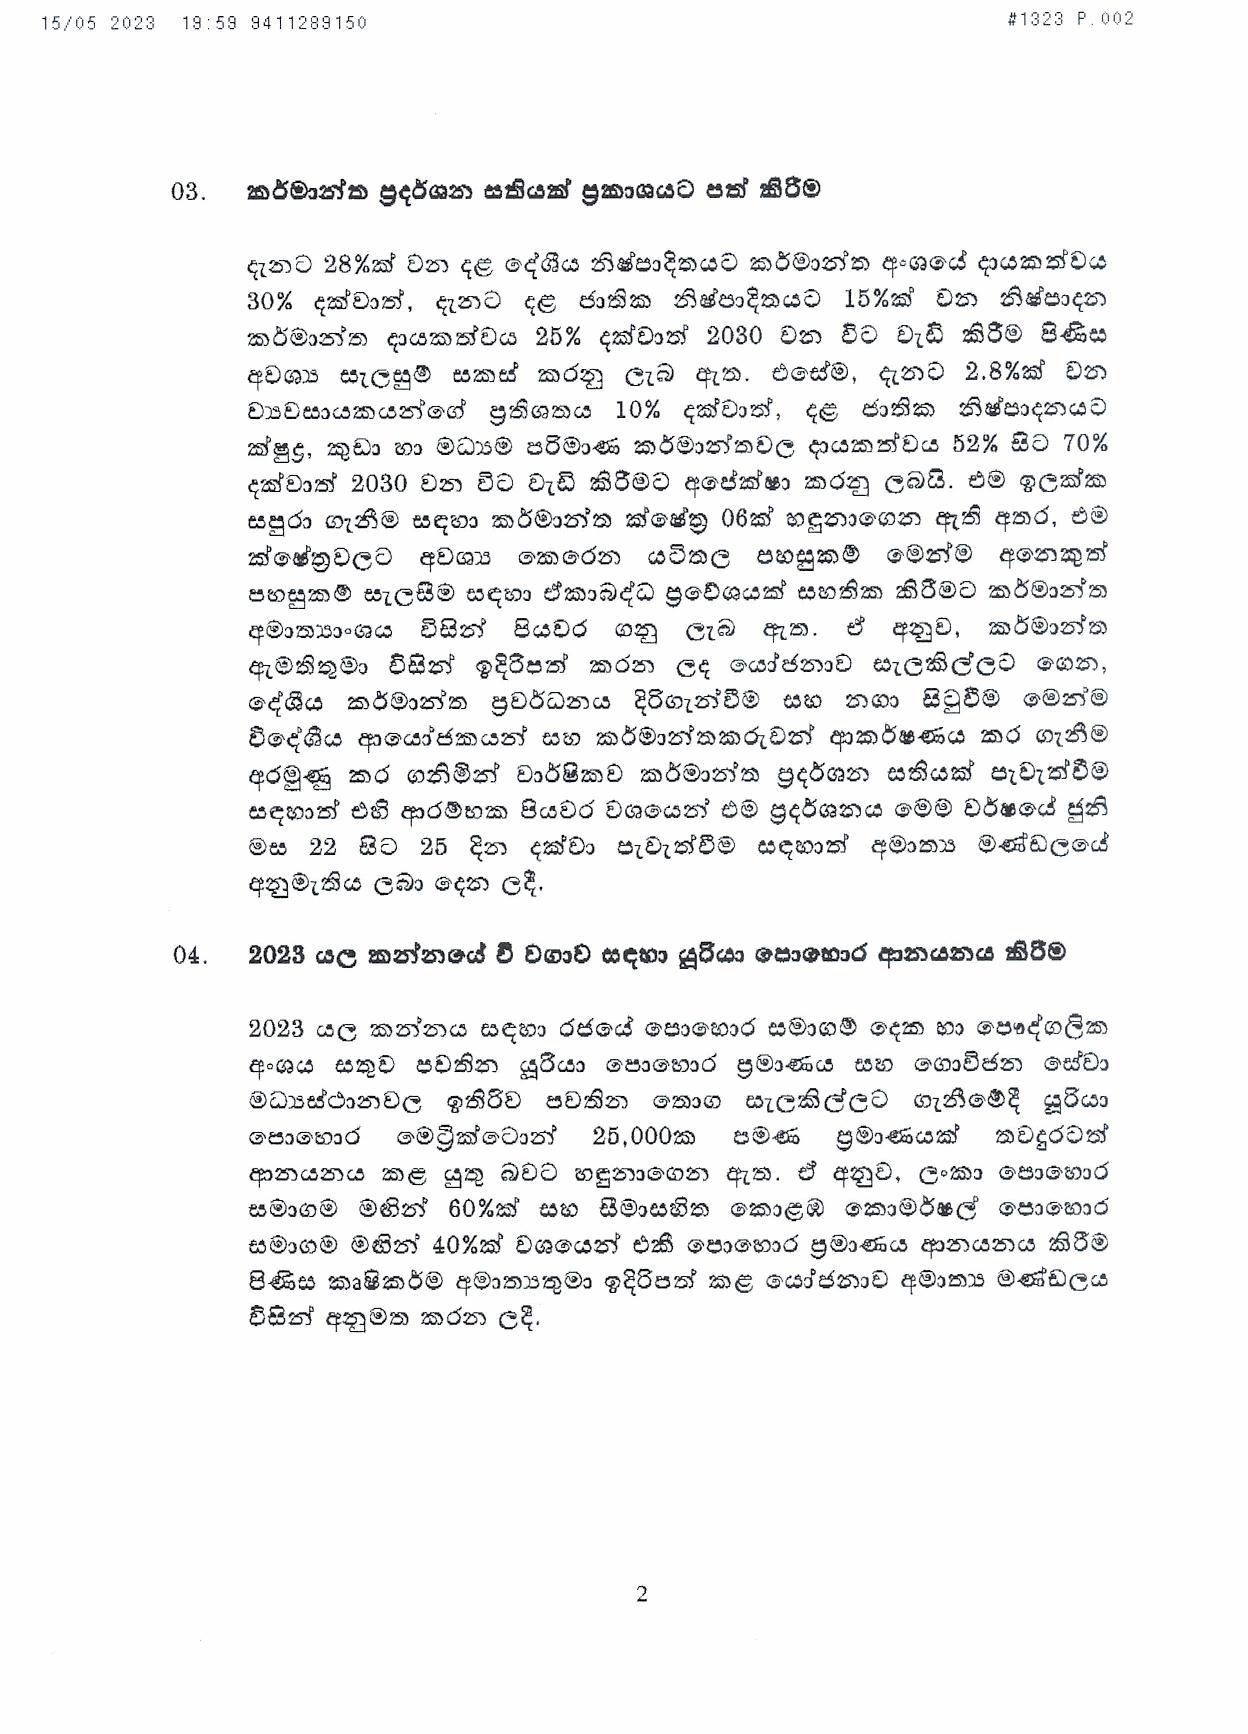 Cabinet Decision on 15.05.2023 page 002